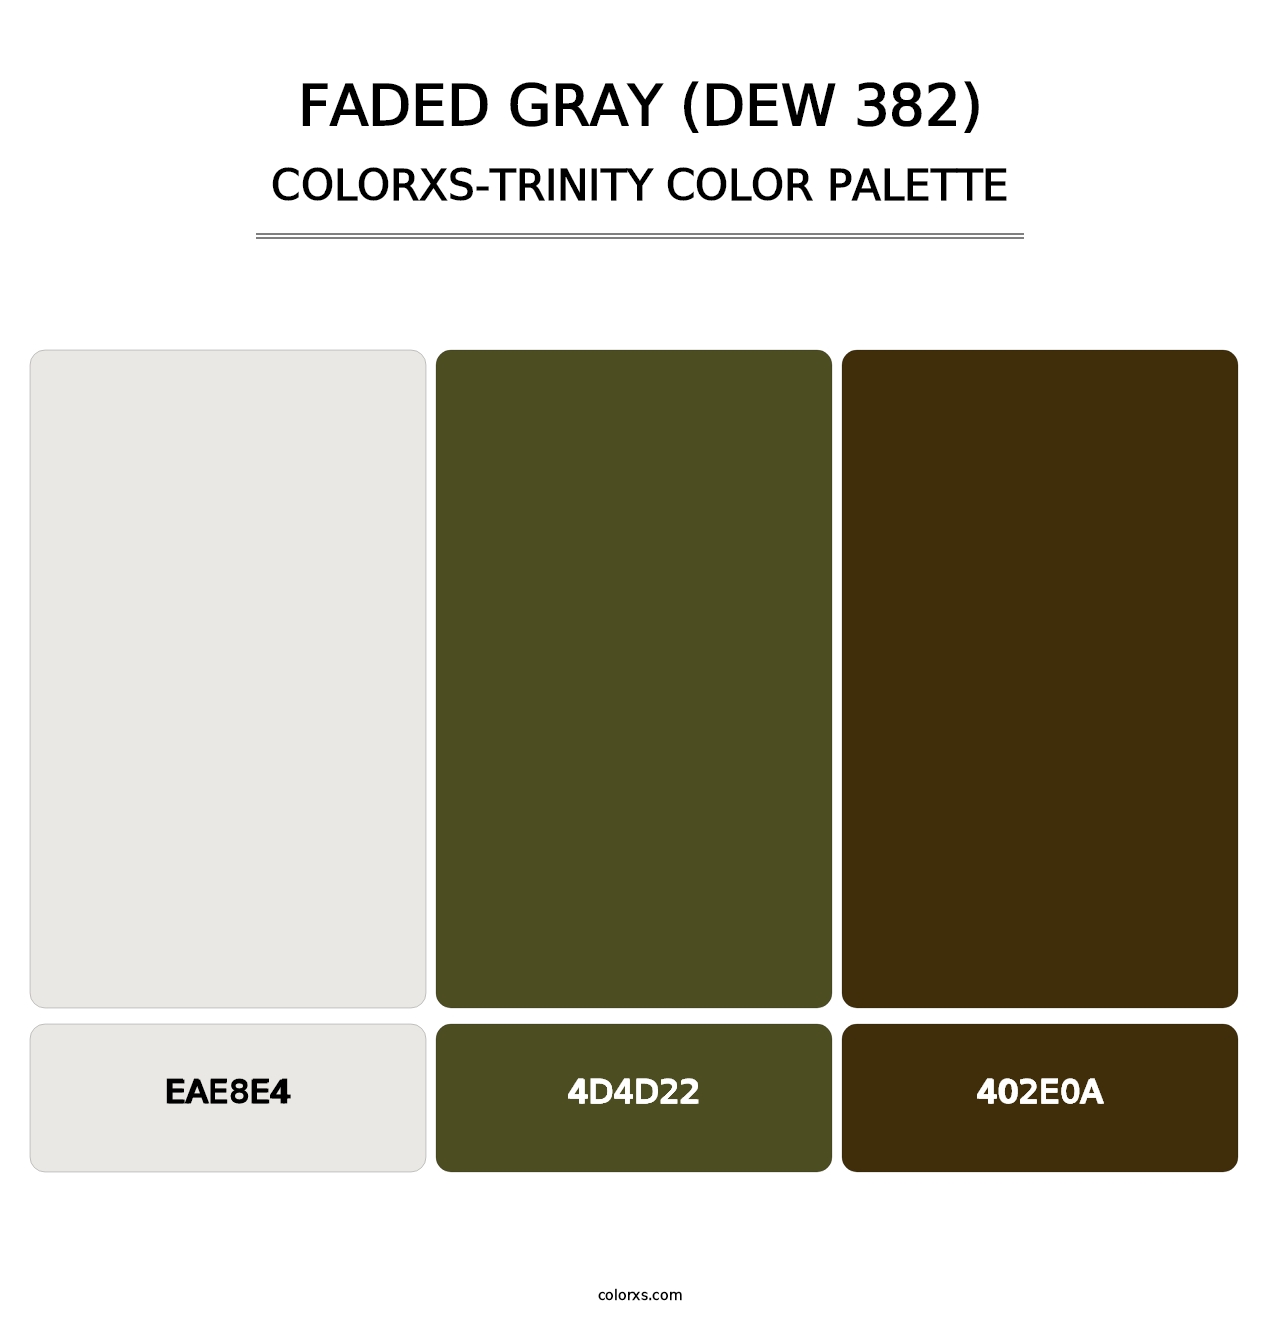 Faded Gray (DEW 382) - Colorxs Trinity Palette